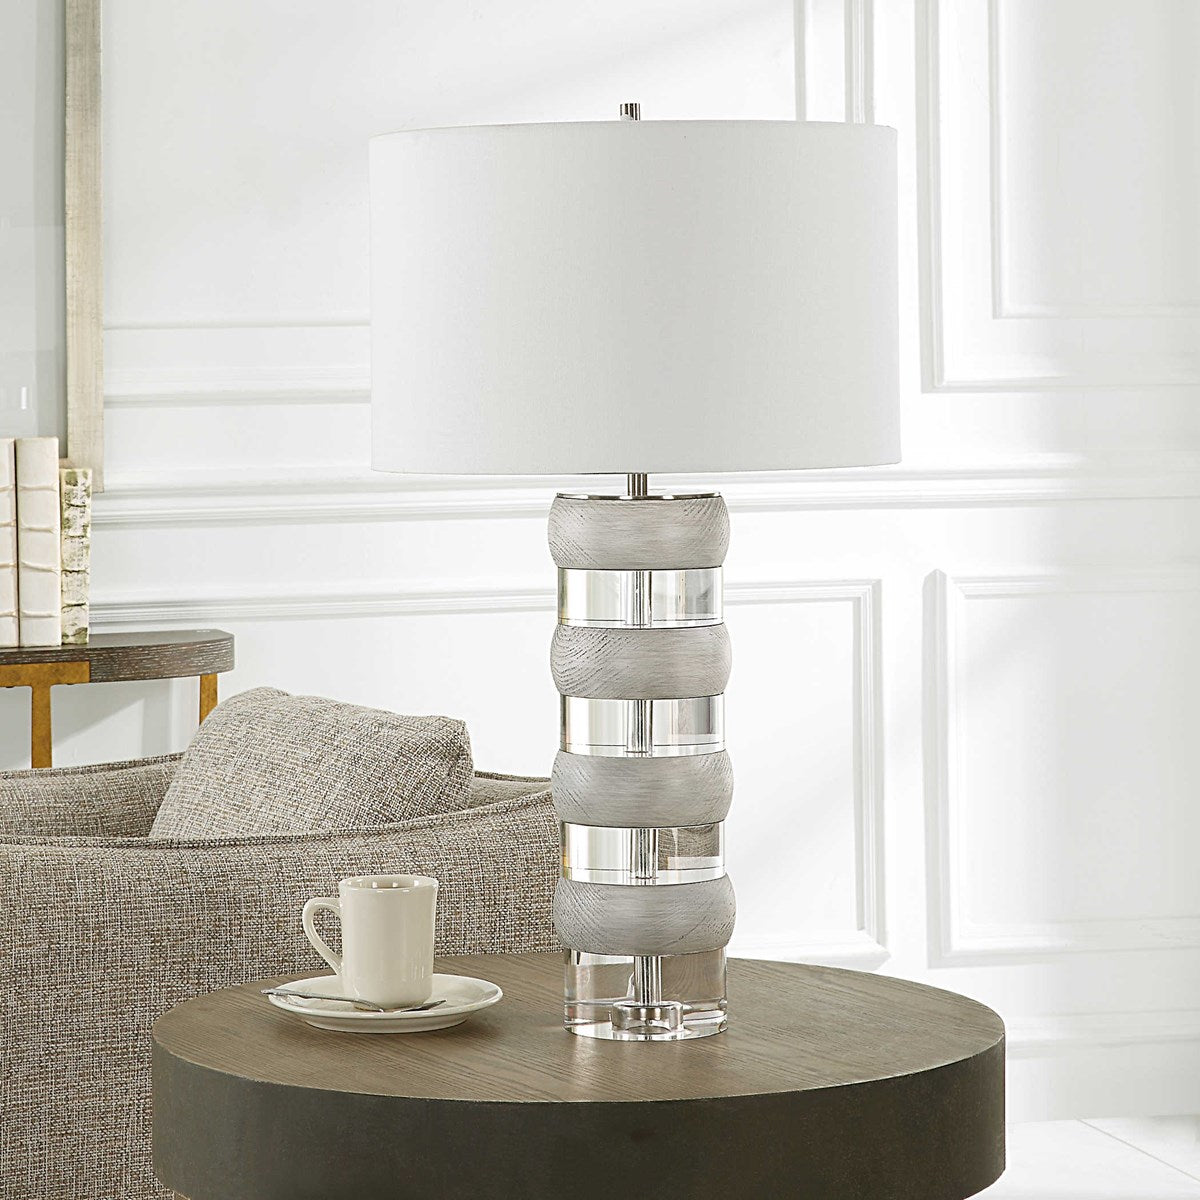 Band Together Table Lamp